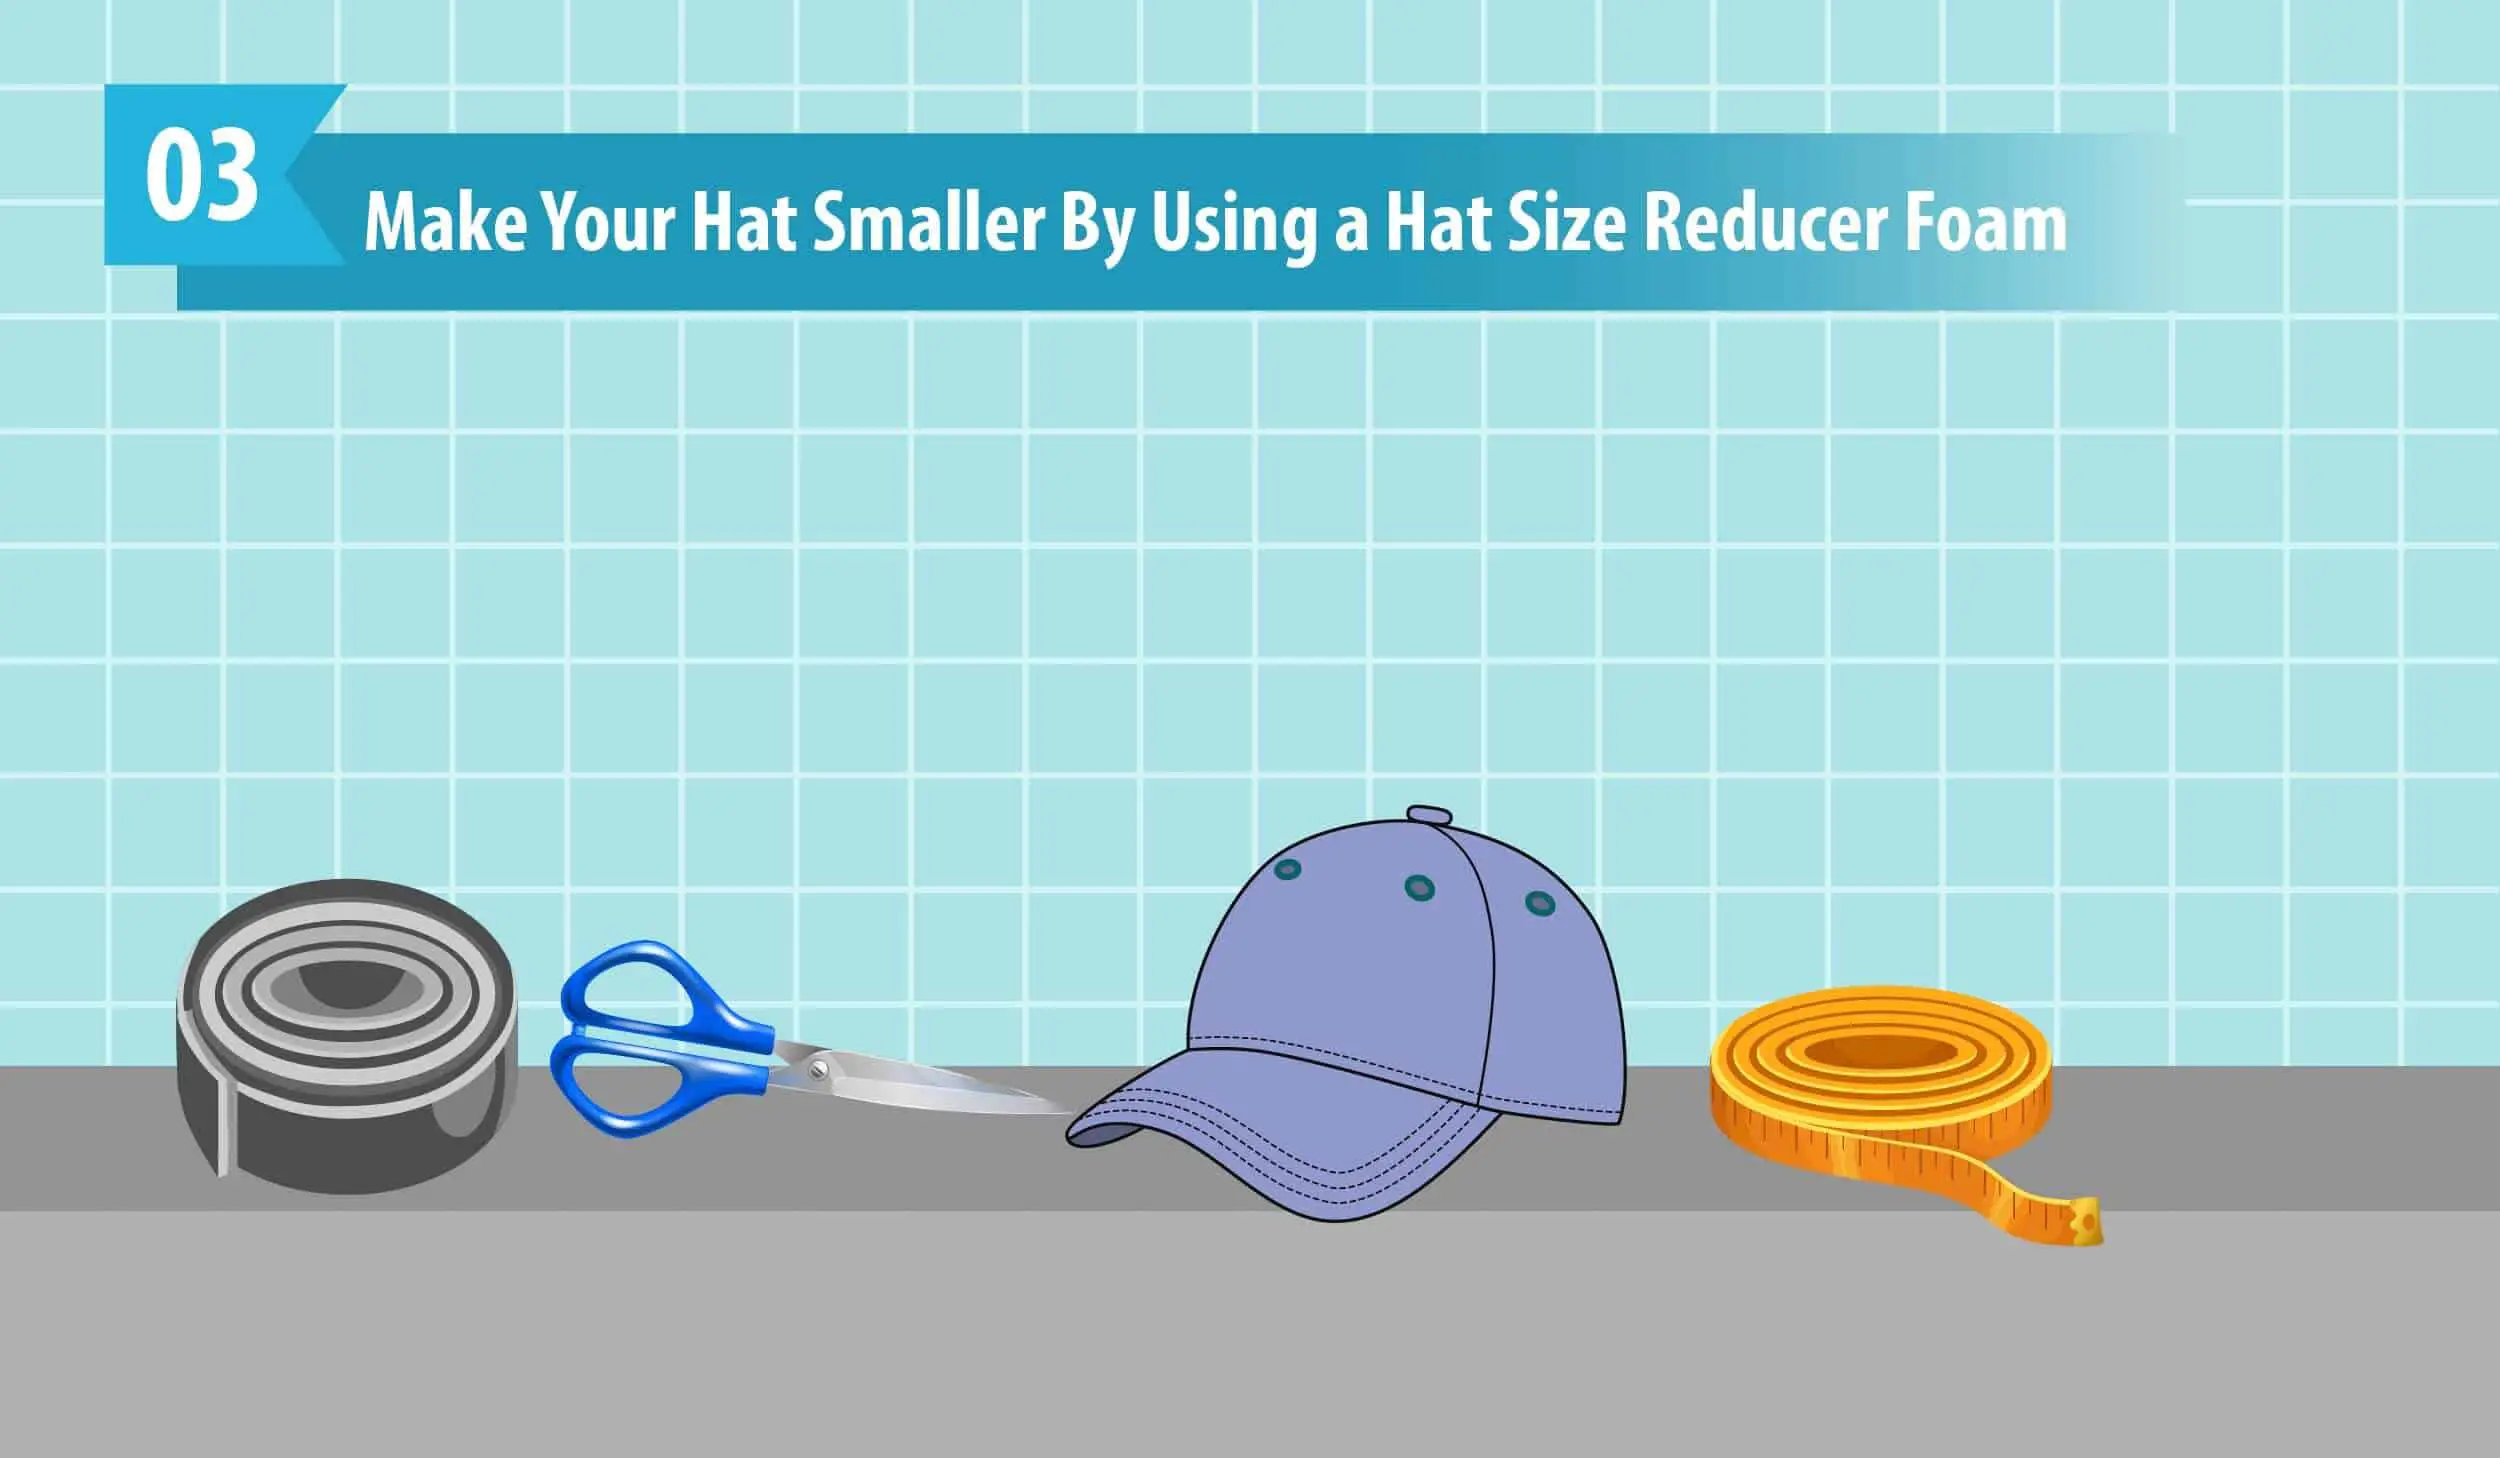 Make Your Hat Smaller By Using a Hat Size Reducer Foam